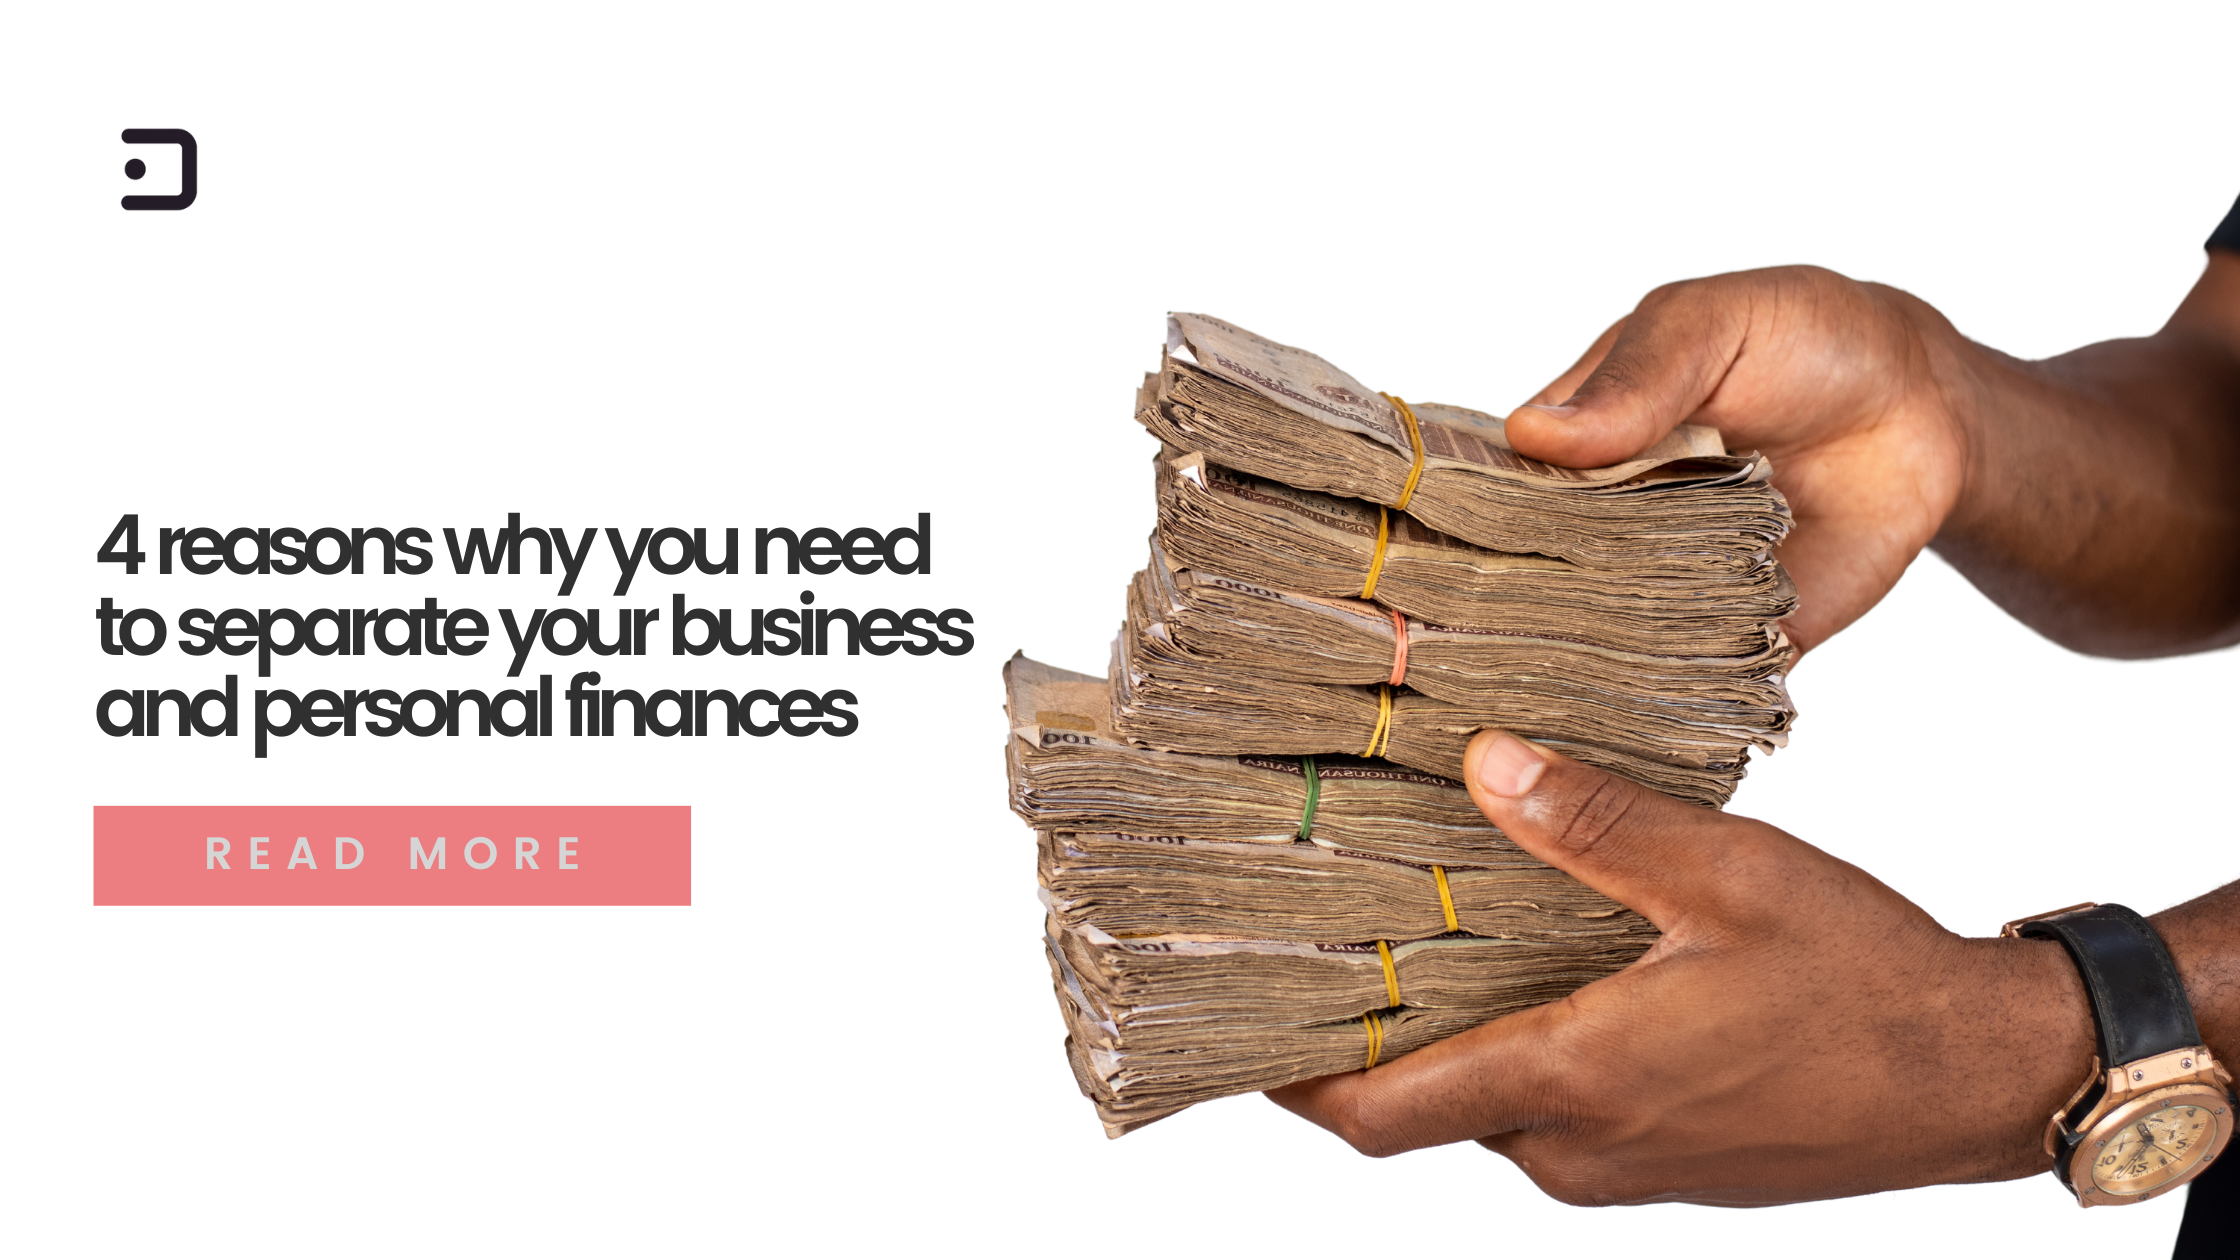 4 reasons why you need to separate your business and personal finances - Dukka